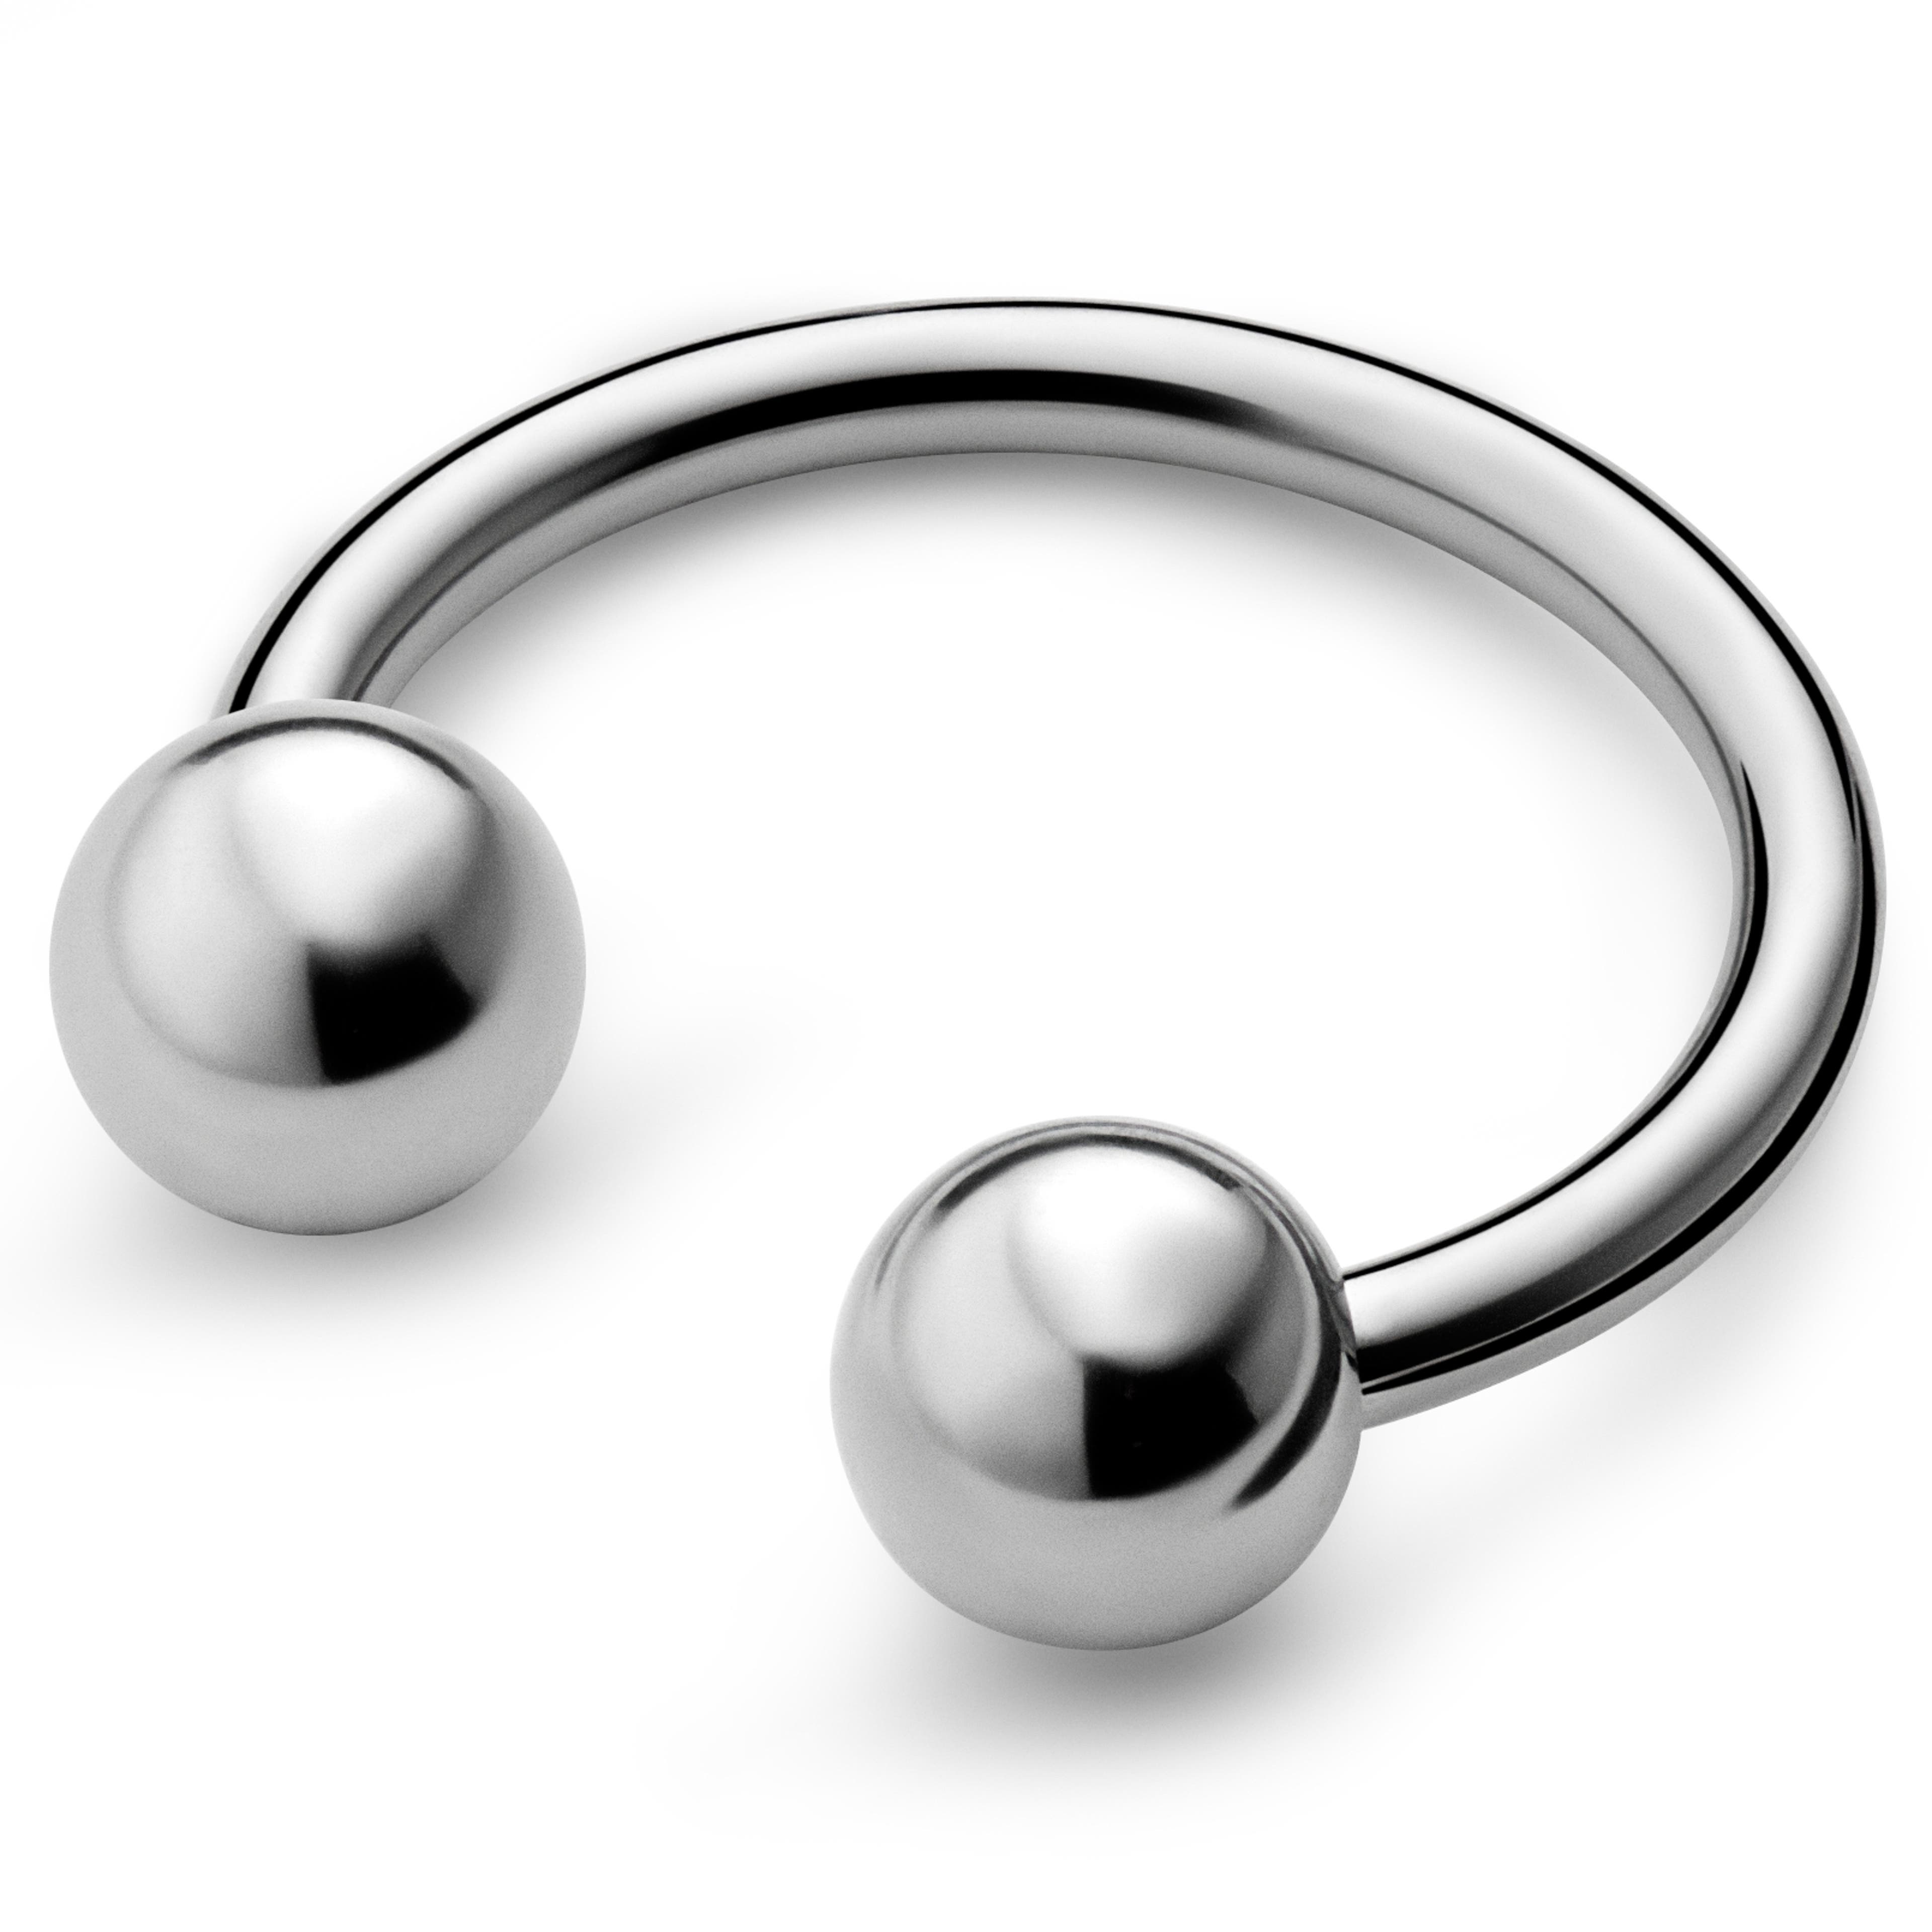 10 mm Silver-Tone Surgical Steel Circular Barbell